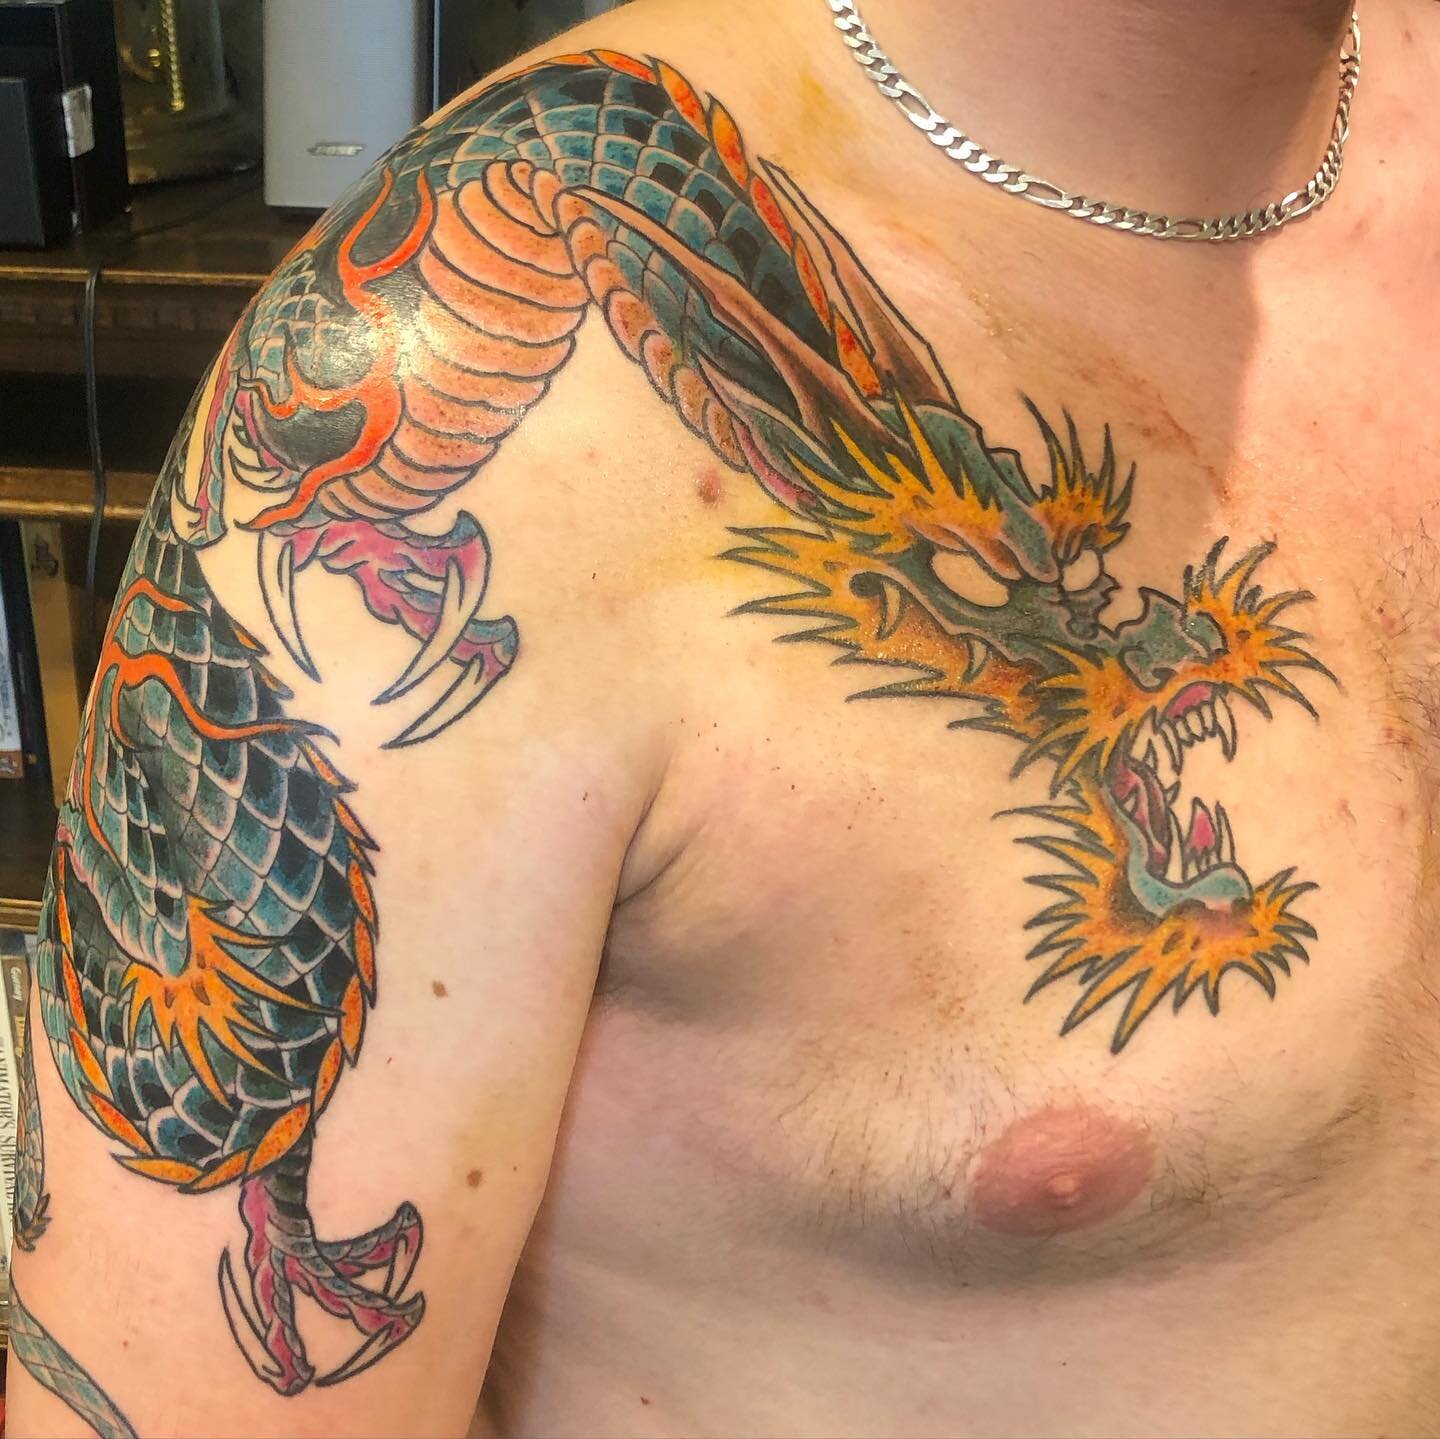 Hard to get a complete photo of this but we colored this dragon. Background and extension next! Thanks for the trust😃

#Letsbuzz #letsbuzztattoo #letsbuzzbergen #bergen #tattoo #tatovering #dragontattoo